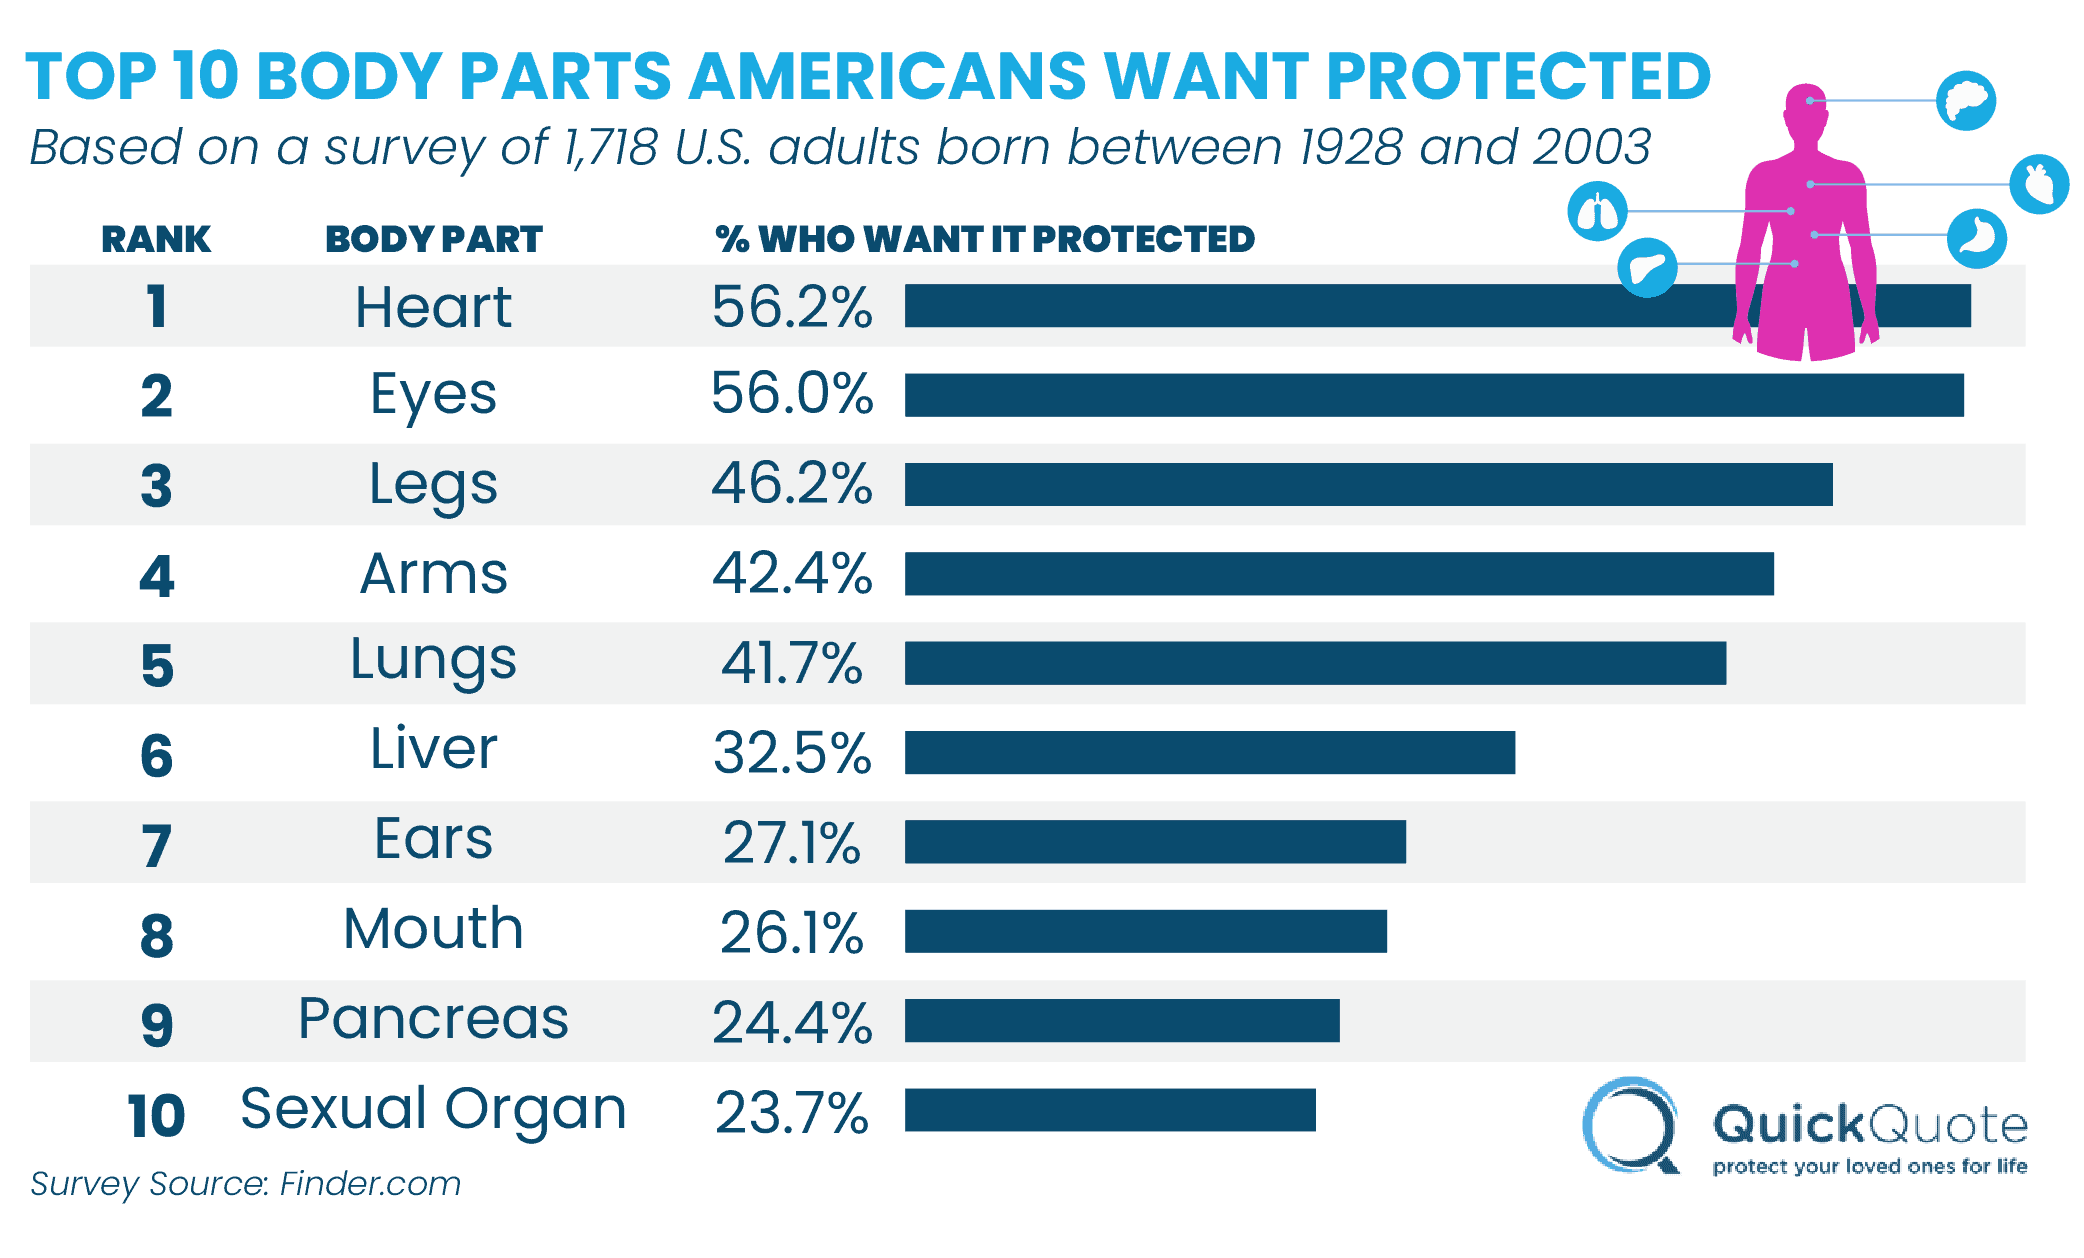 Top 10 Body Parts Americans Want Protected